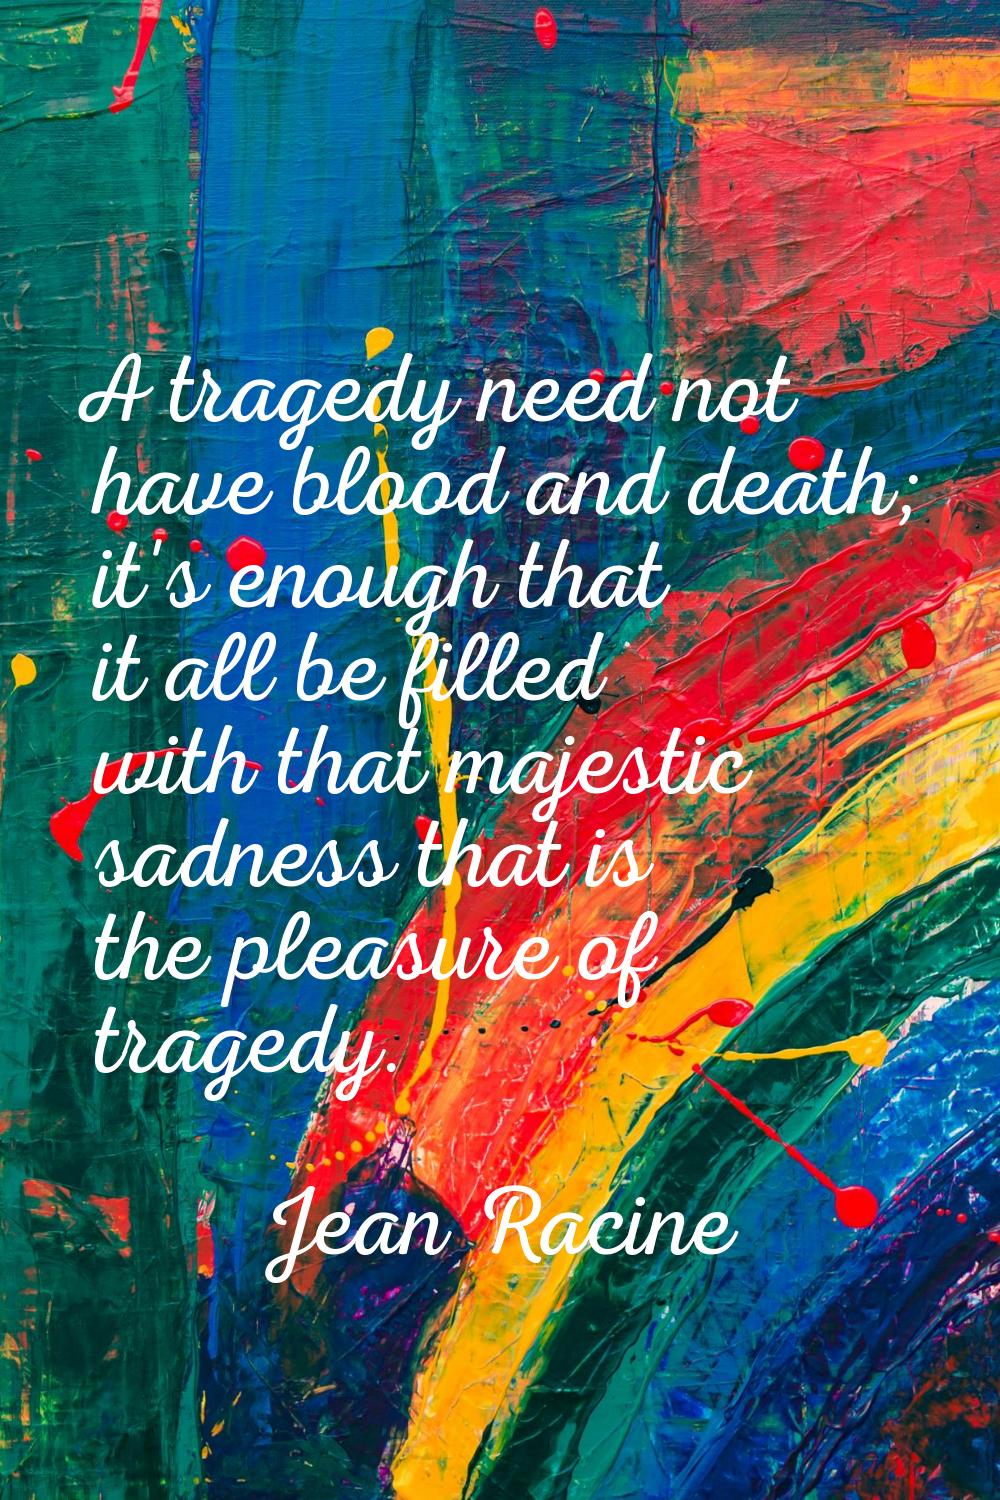 A tragedy need not have blood and death; it's enough that it all be filled with that majestic sadne